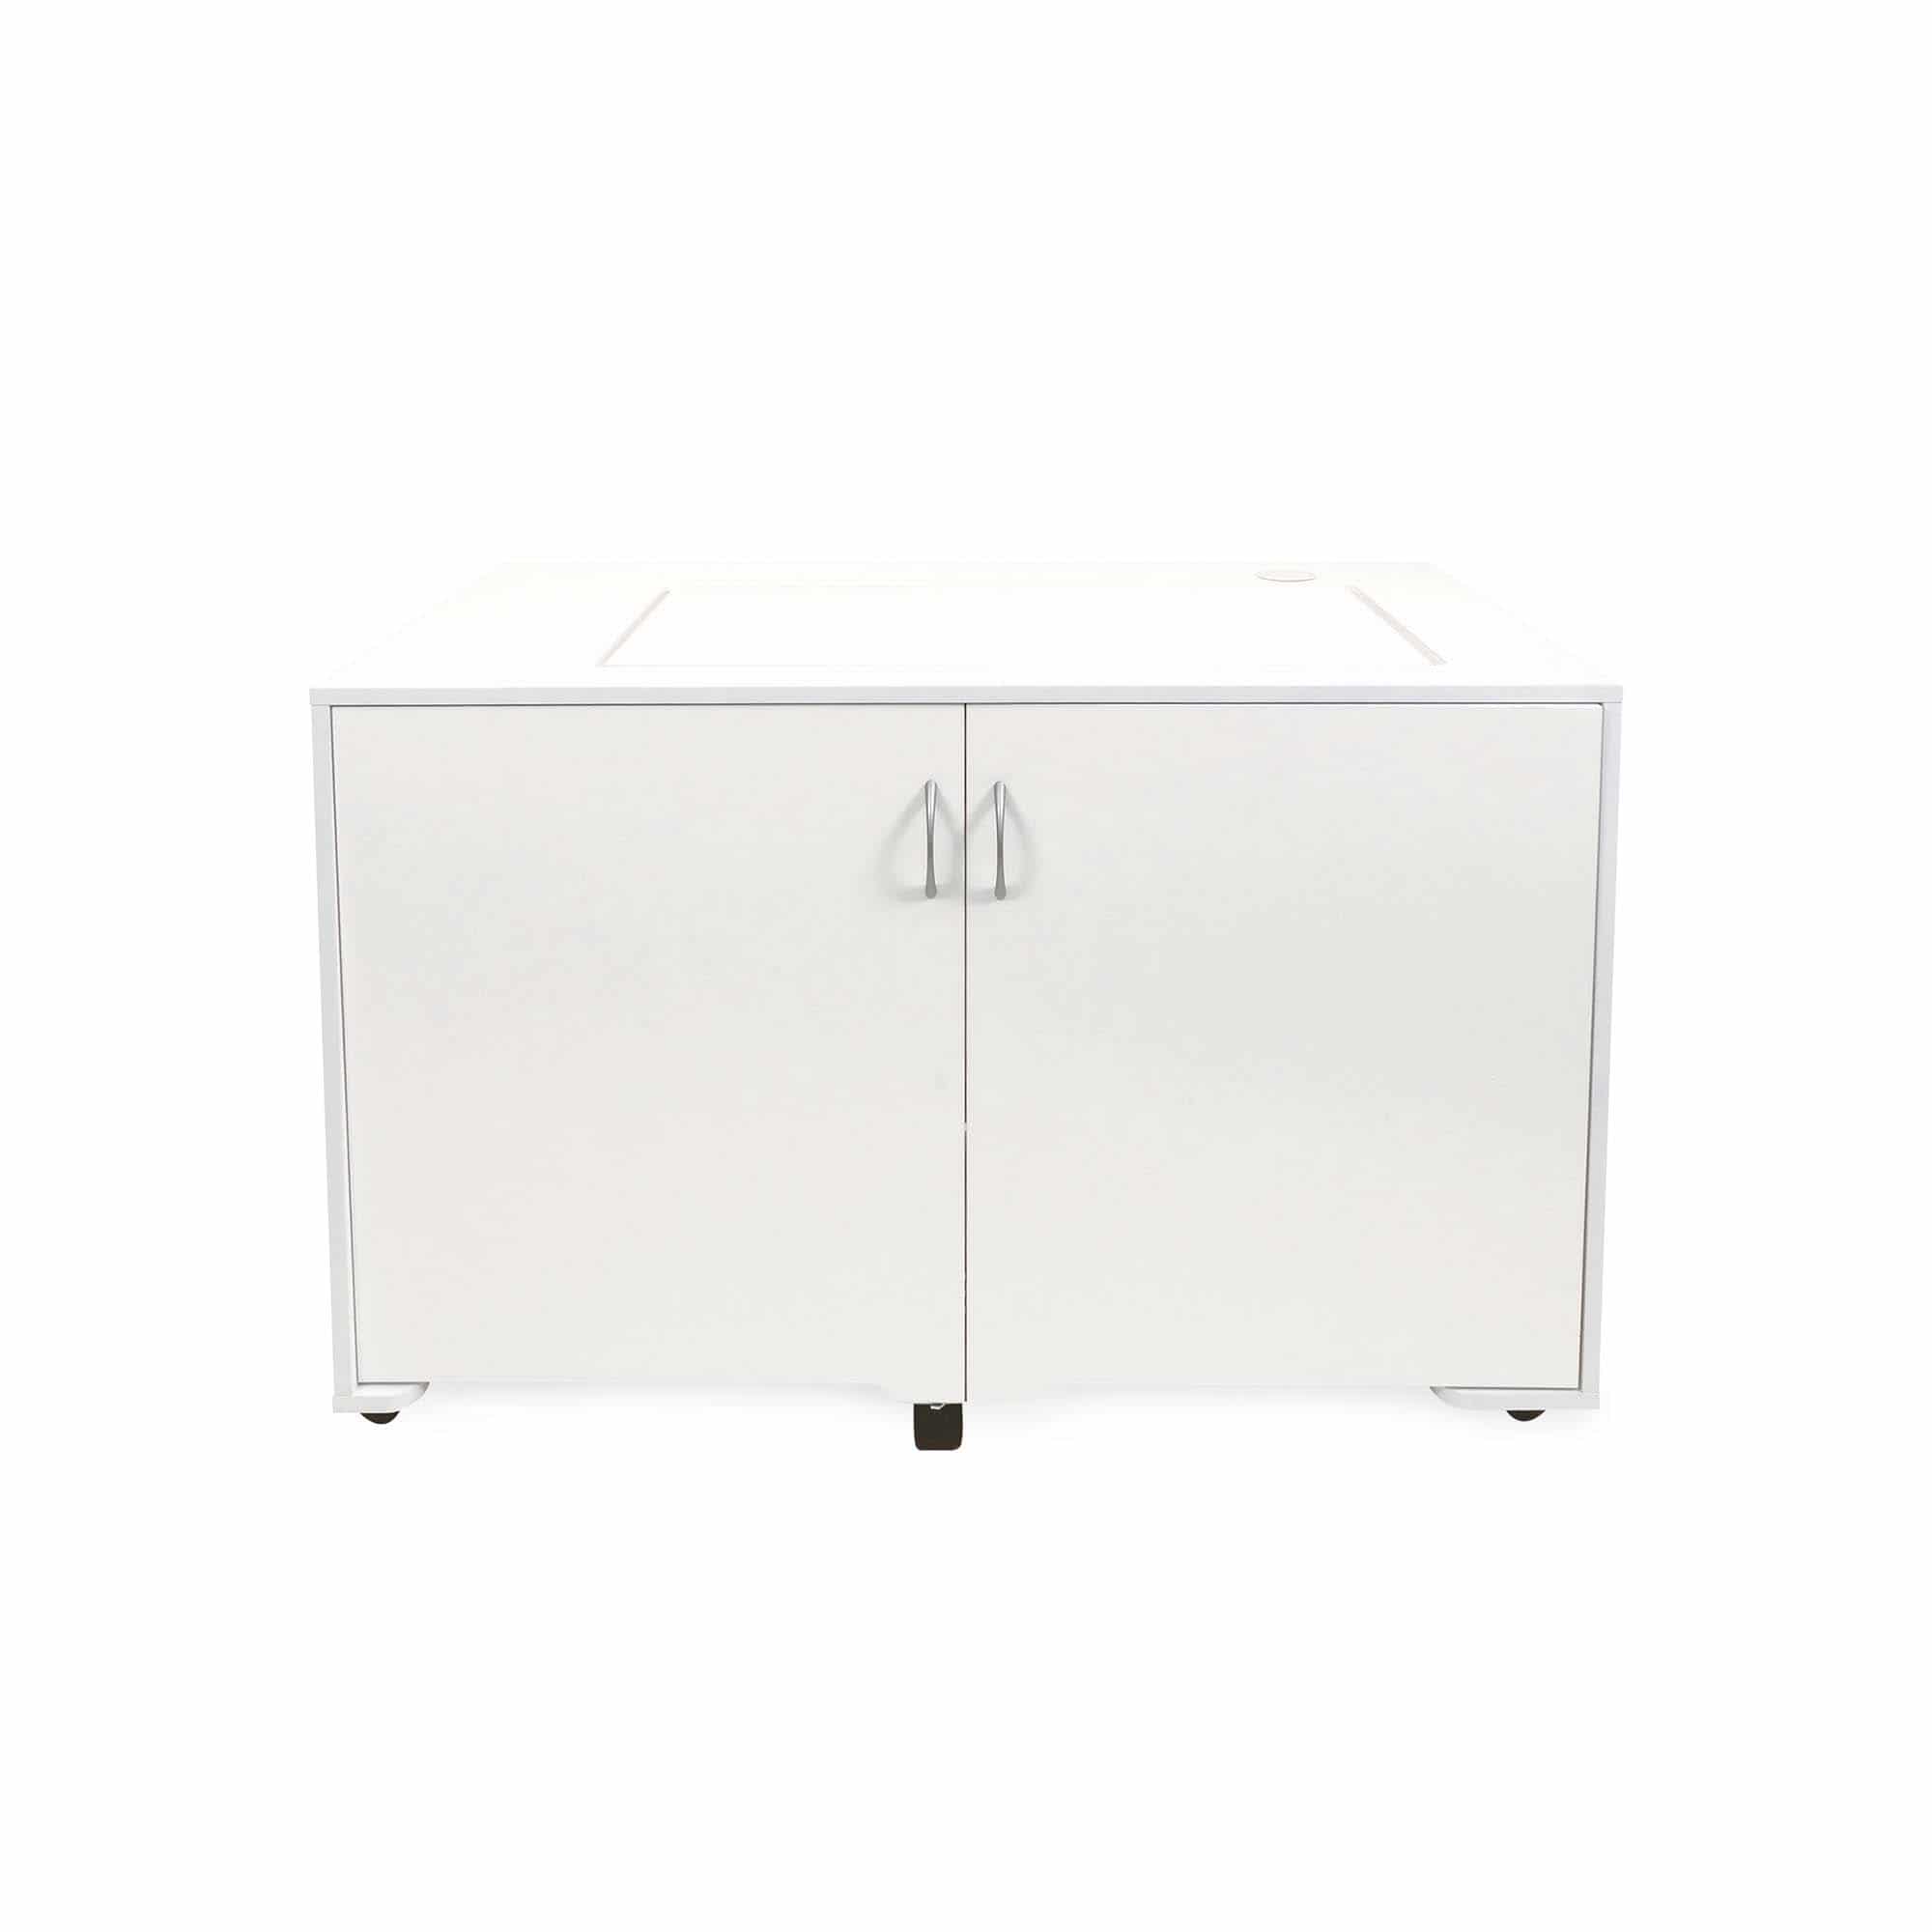 MOD XL Sewing Cabinet provides a feature-heavy workstation for sewers looking for timeless design and a home-friendly footprint. Shop at Arrow Sewing.